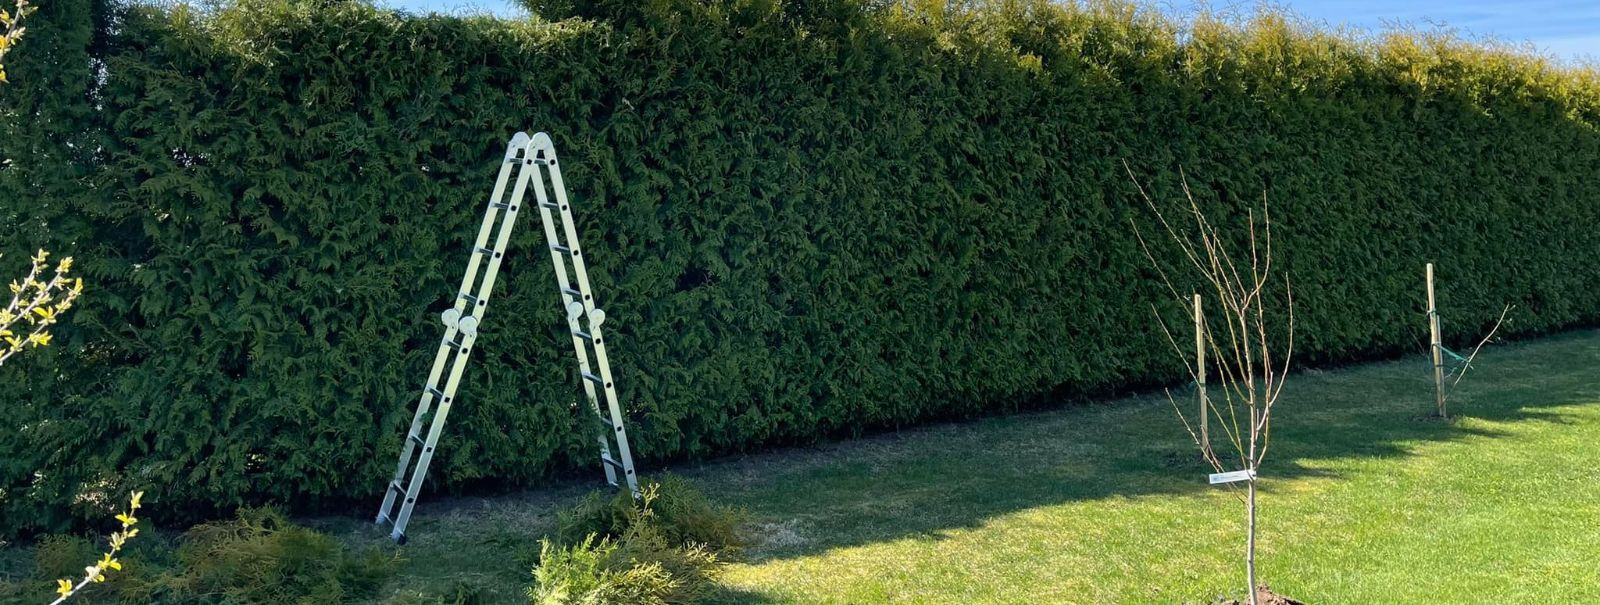 Hedge trimming is not just about maintaining a neat appearance; it's a crucial practice for the health and vitality of your garden's greenery. Regular trimming 